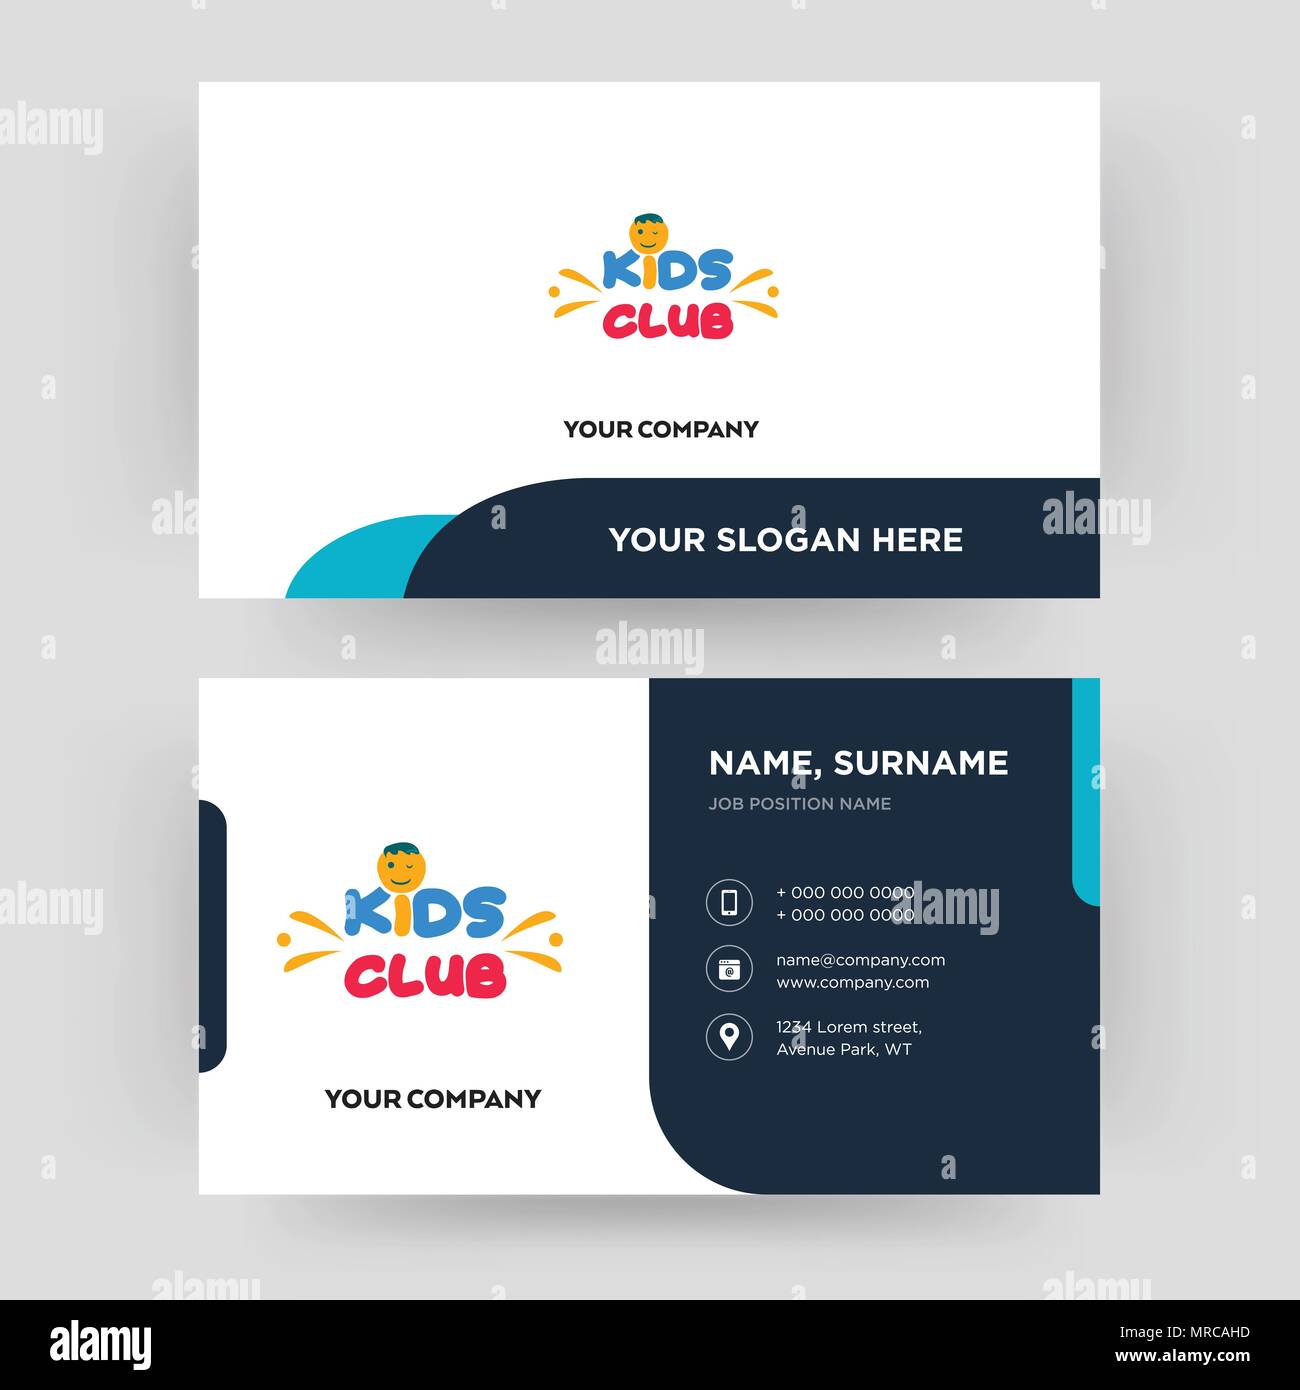 kids club, business card design template, Visiting for your With Id Card Template For Kids